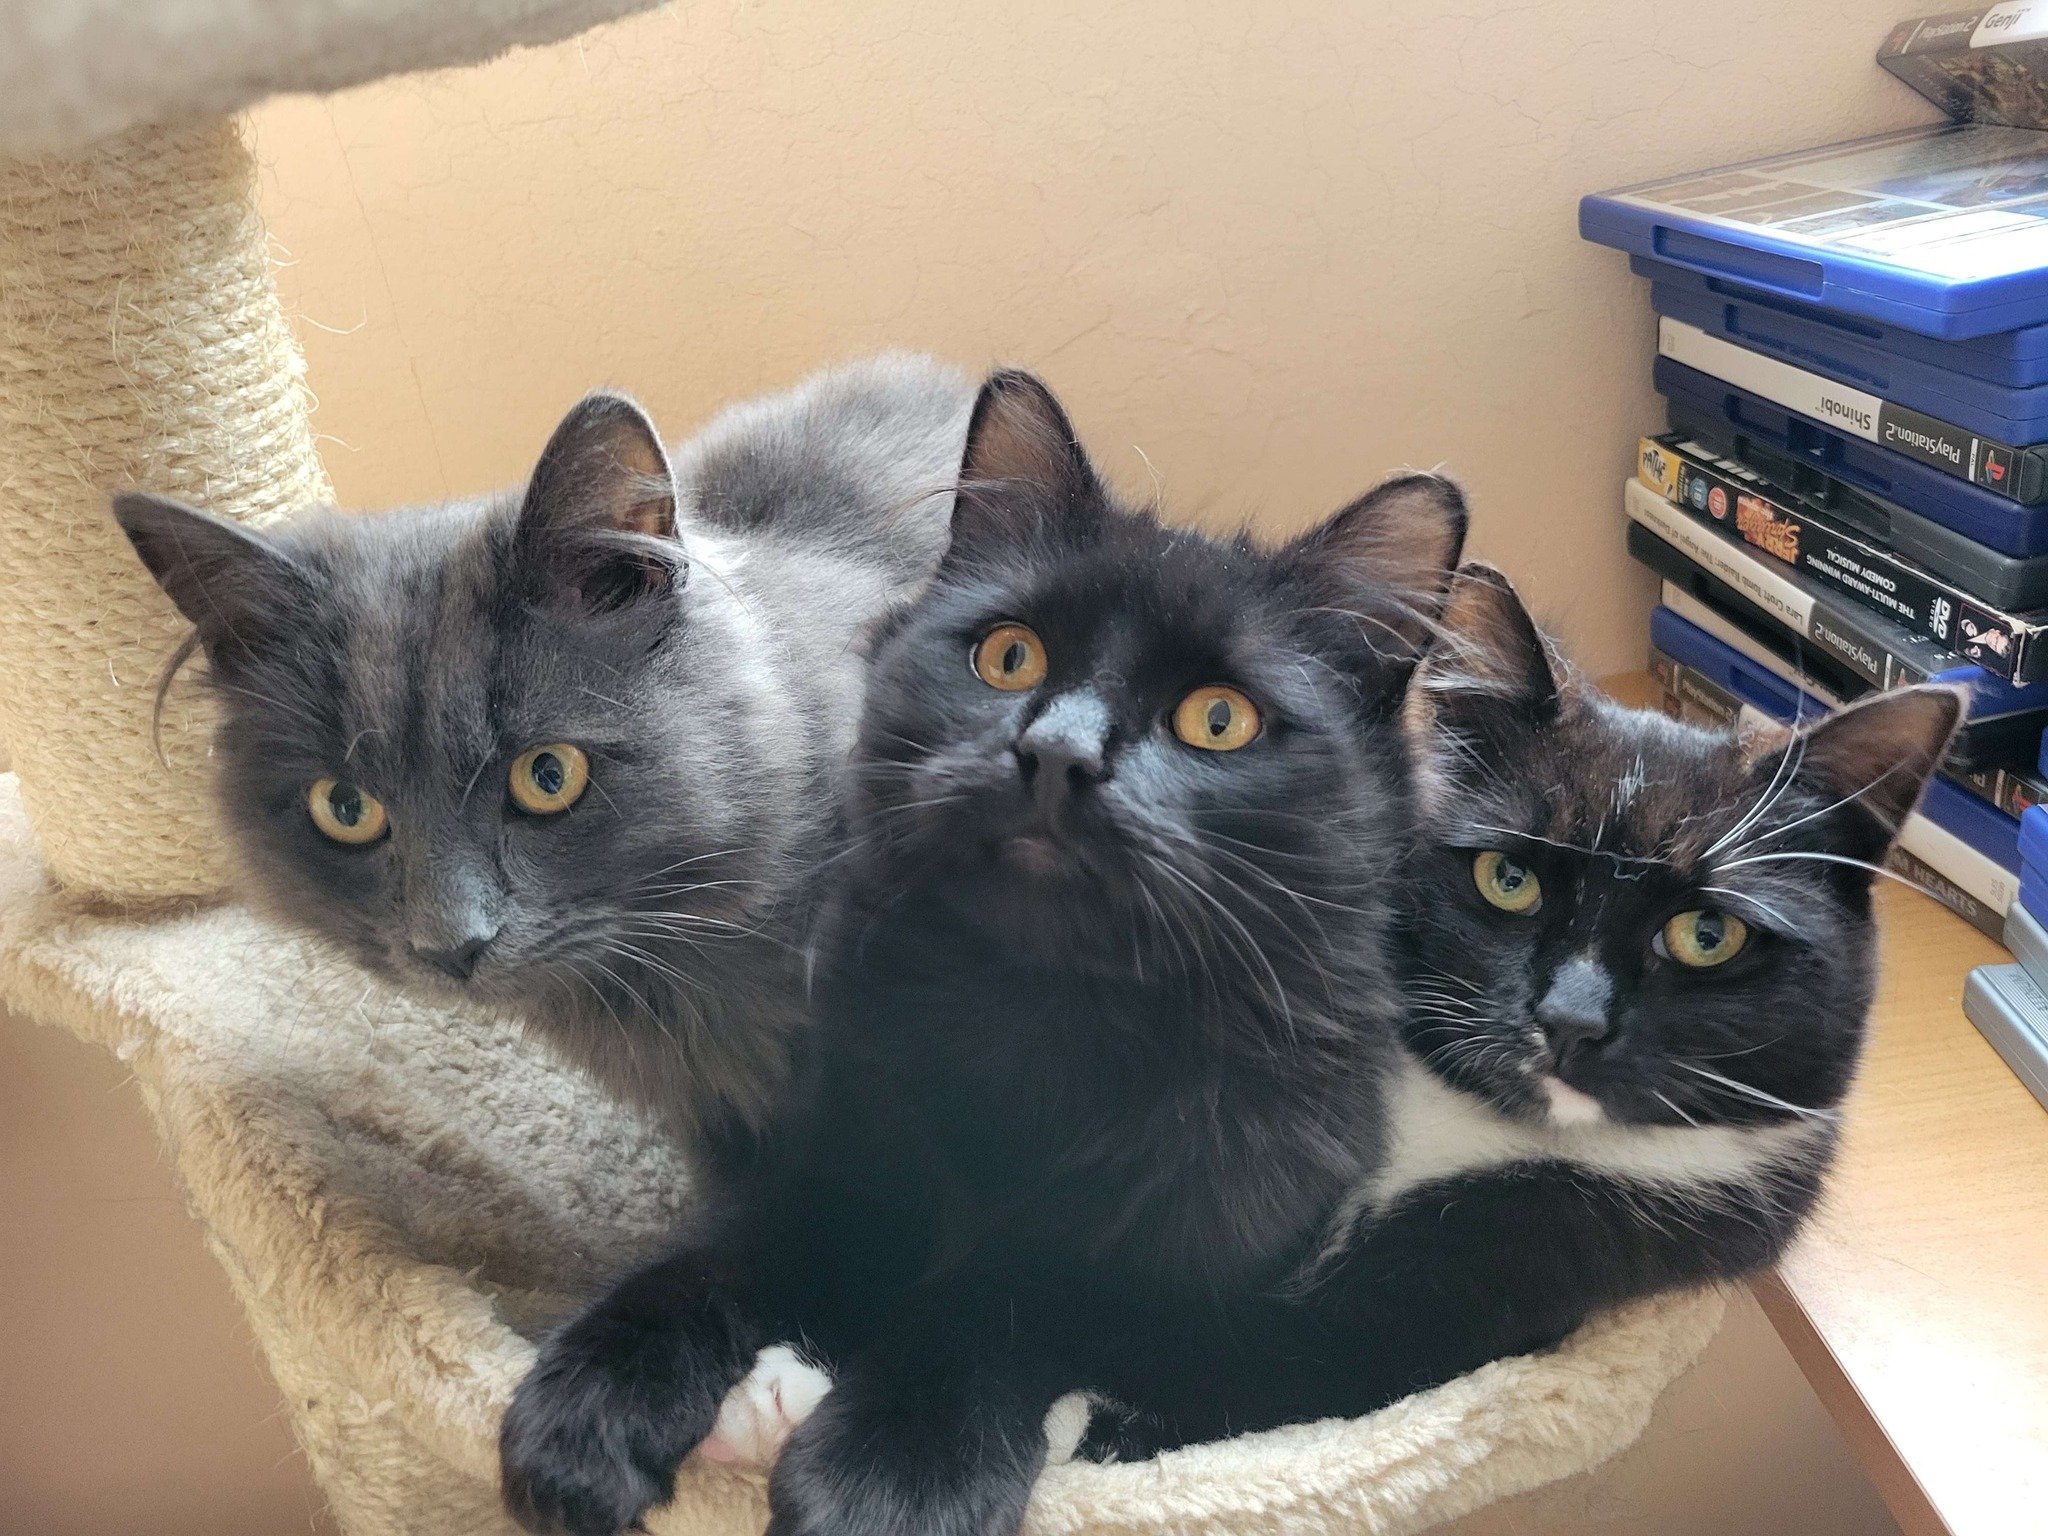 Bluebell, Dandelion, and Snowdrop are in to be neutered this morning!

These three are really settling in well. We're particularly proud of Bluebell, who was absolutely horrified when they first came in! 

It won't be long now before these three are 